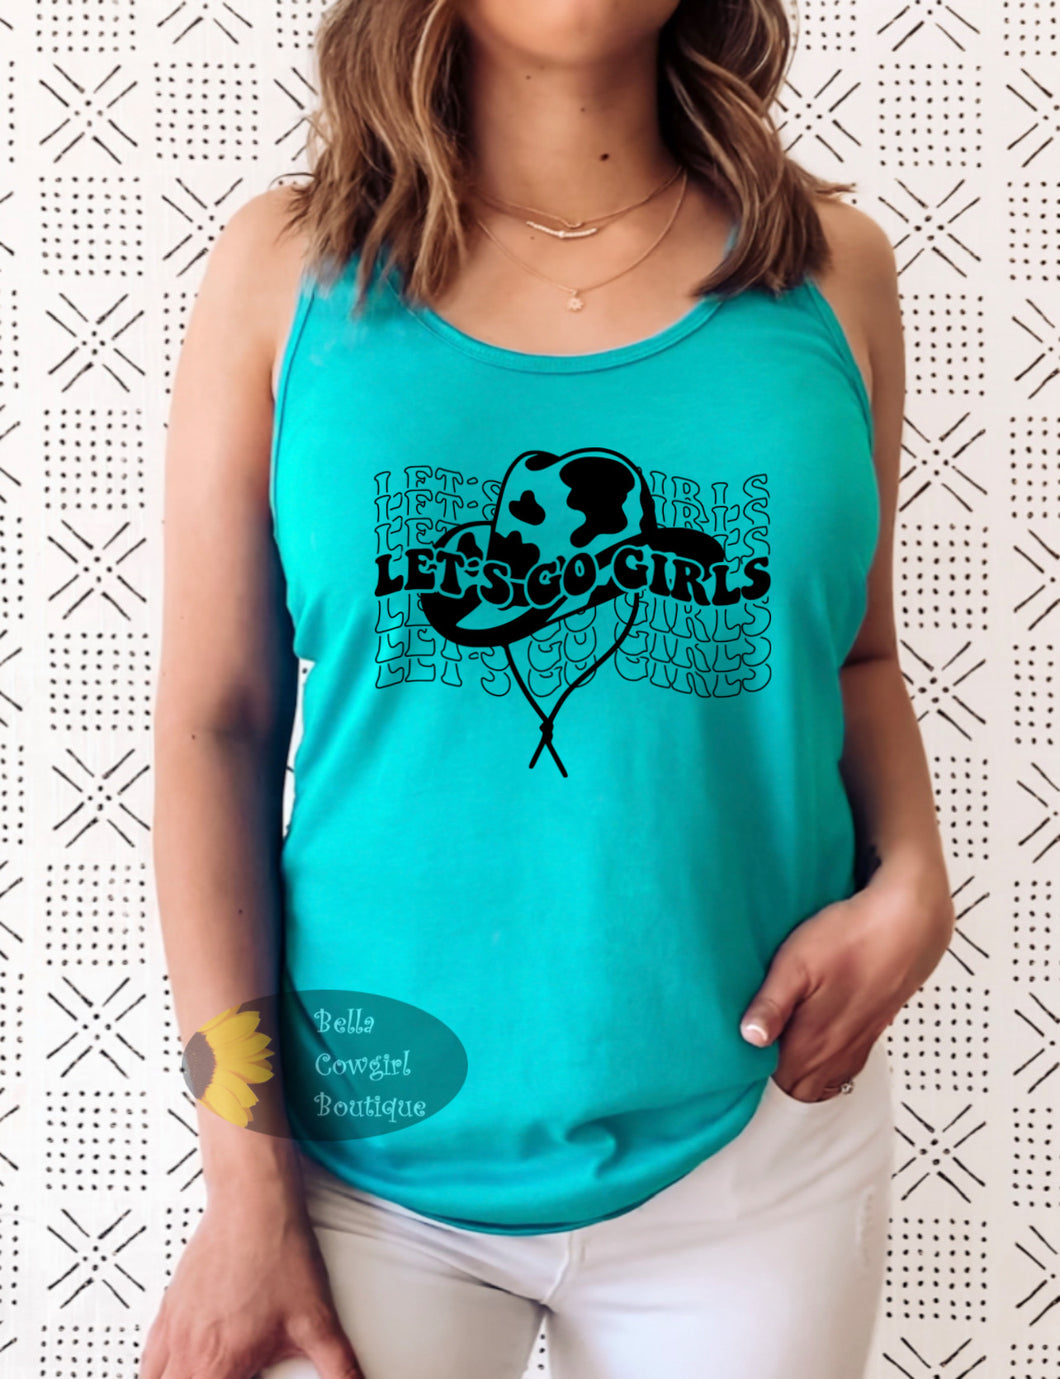 Let's Go Girls Country Western Women's Tank Top